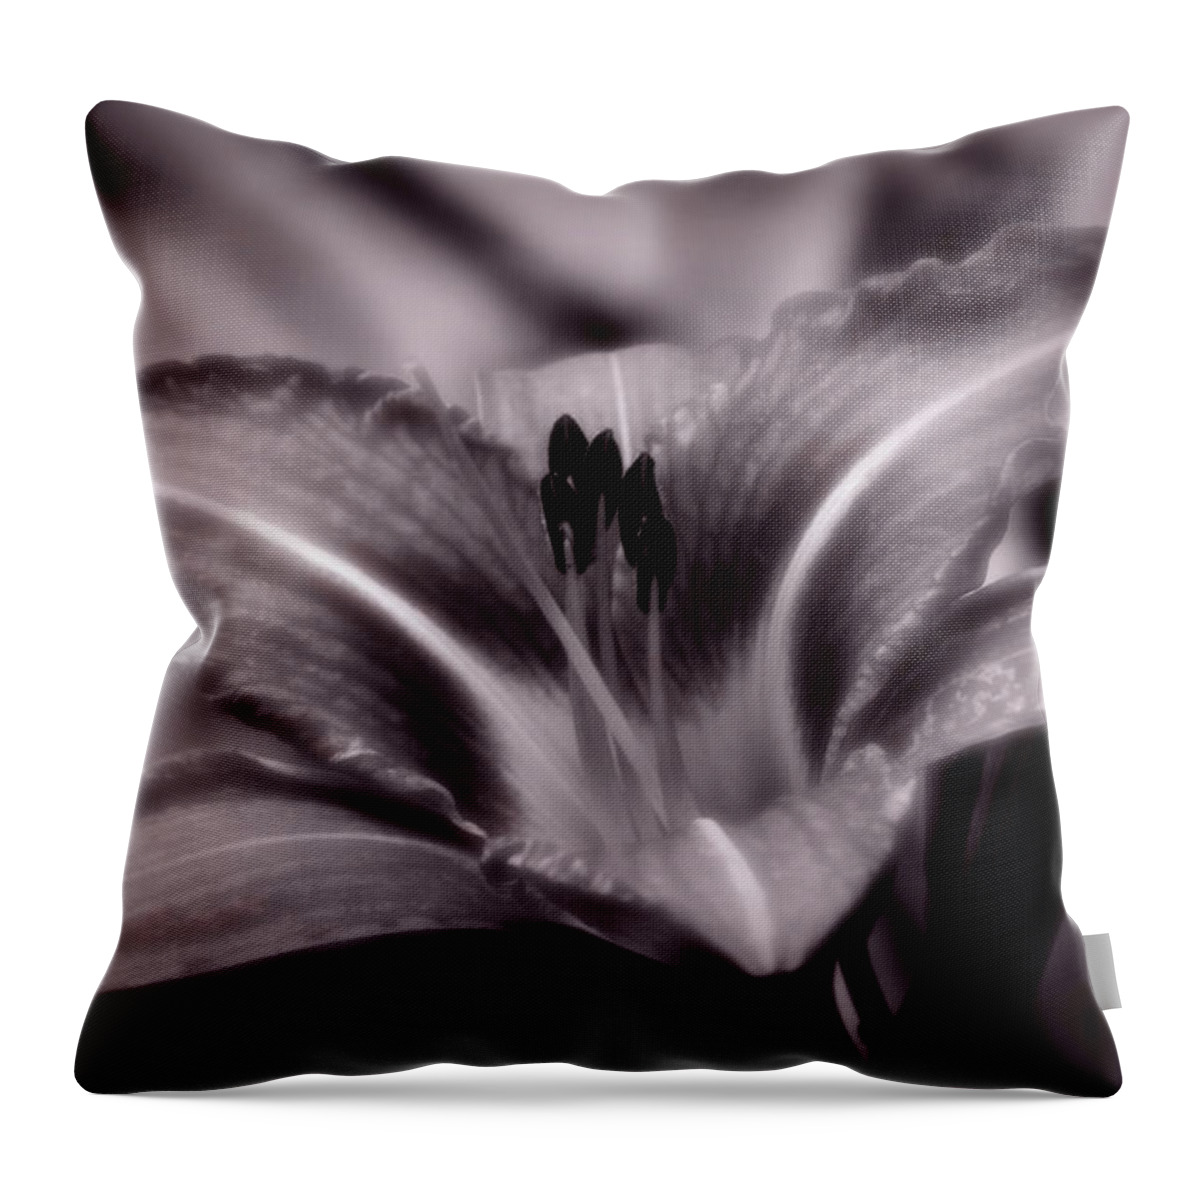 Lily Throw Pillow featuring the photograph I Dream Of You by Jeanette C Landstrom